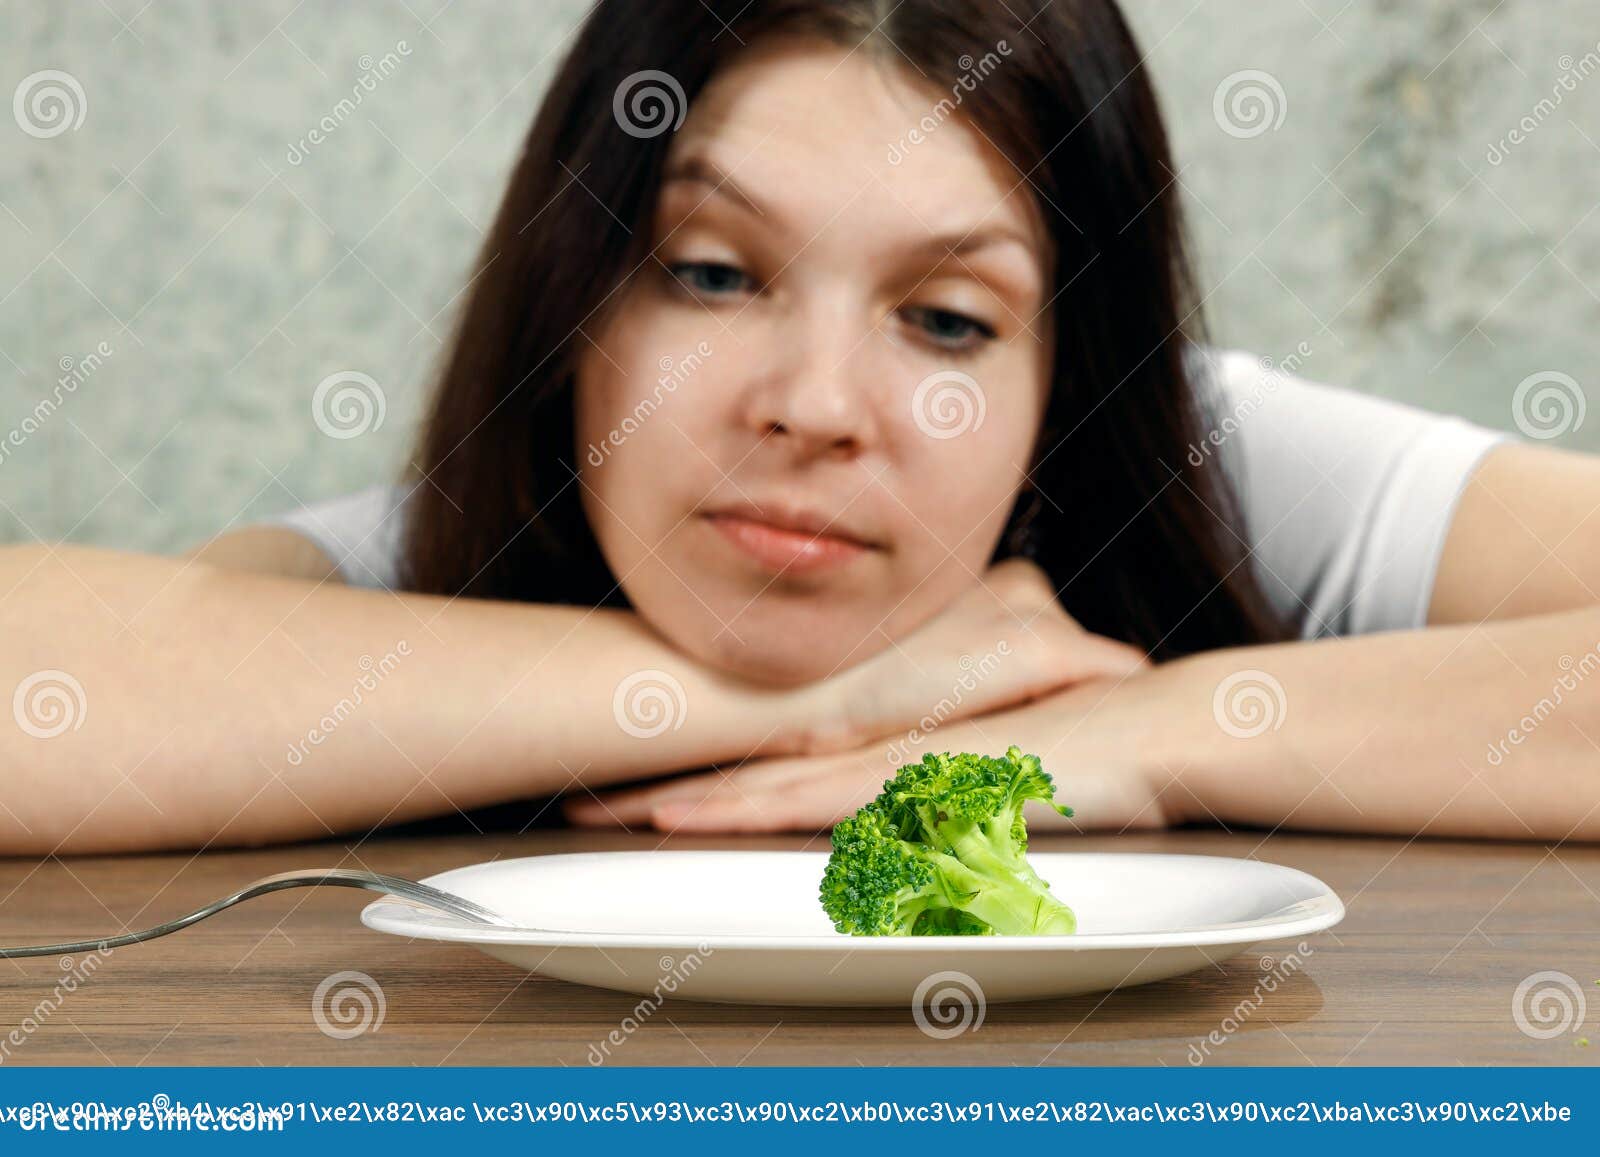 sad young brunette woman dealing with anorexia nervosa or bulimia having small green vegetable on plate. dieting problems, eating